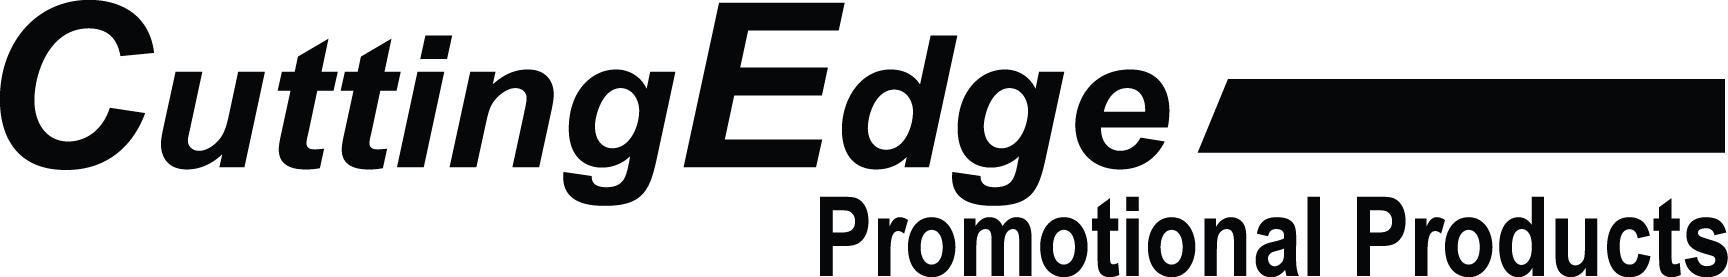 Cutting Edge Promotional Products's Logo